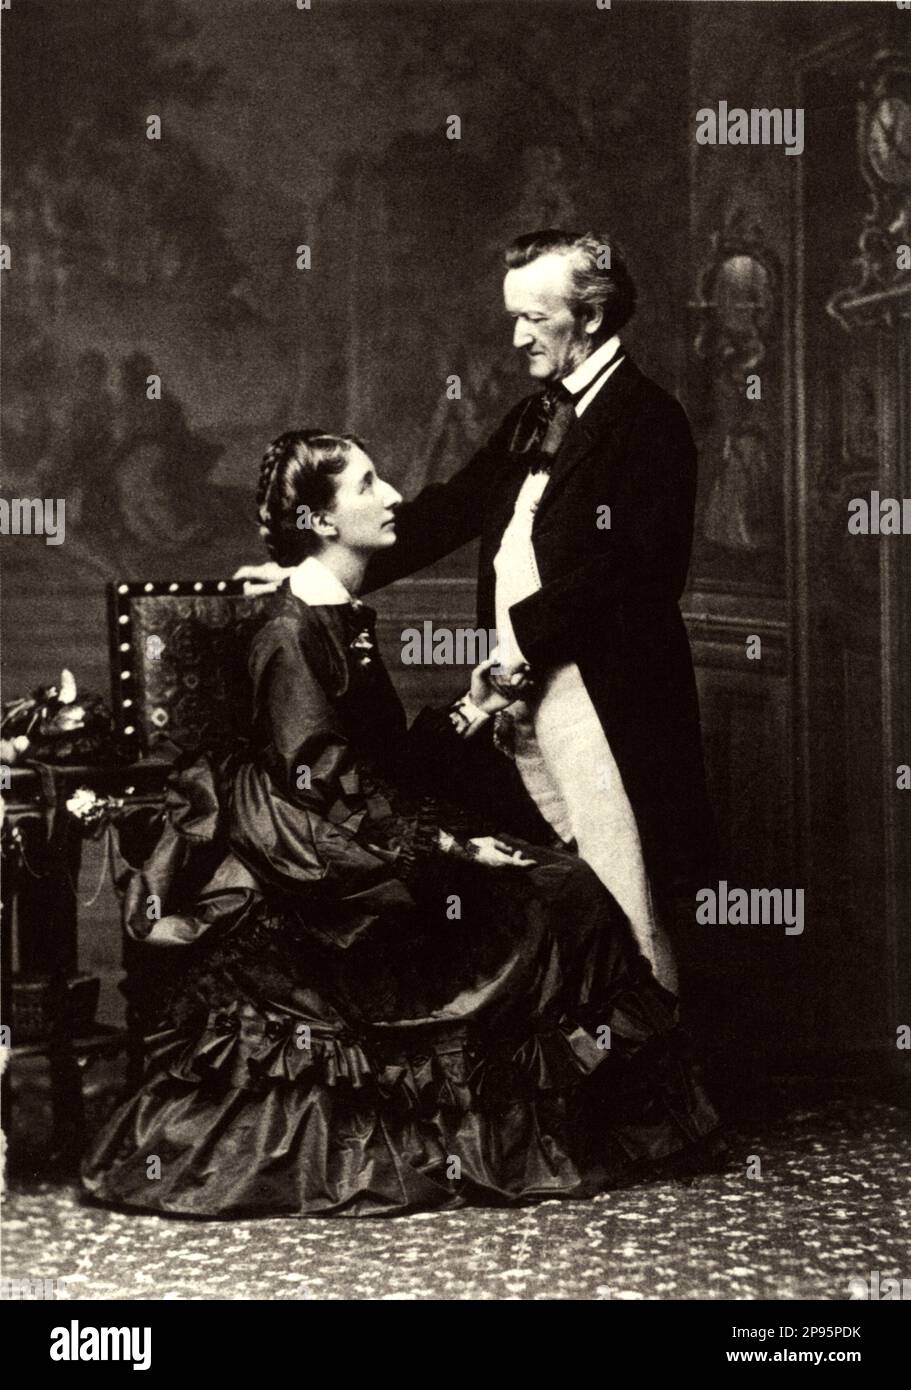 1872 , GERMANY : The german music composer RICHARD WAGNER ( 1813- 1883 ) with wife COSIMA WAGNER LISZT ( daughter of music composer Franz Liszt and countess Marie de Flavigny d'Agout , 1837 - 1930 ), married with music conductor Hans Von Bulow , close friend of Wagner . Photo by Fritz Luckhardt . - MUSIC - CLASSICAL - MUSICA CLASSICA - LIRICA - OPERA - BAVARIA - BAVIERA - compositore - musicista - portrait - ritratto - profilo - profile - lovers - amanti - COMPOSITORE - OPERA LIRICA  - MUSICISTA   - collar - colletto  - CRAVATTA - TIE - -- ARCHIVIO GBB Stock Photo